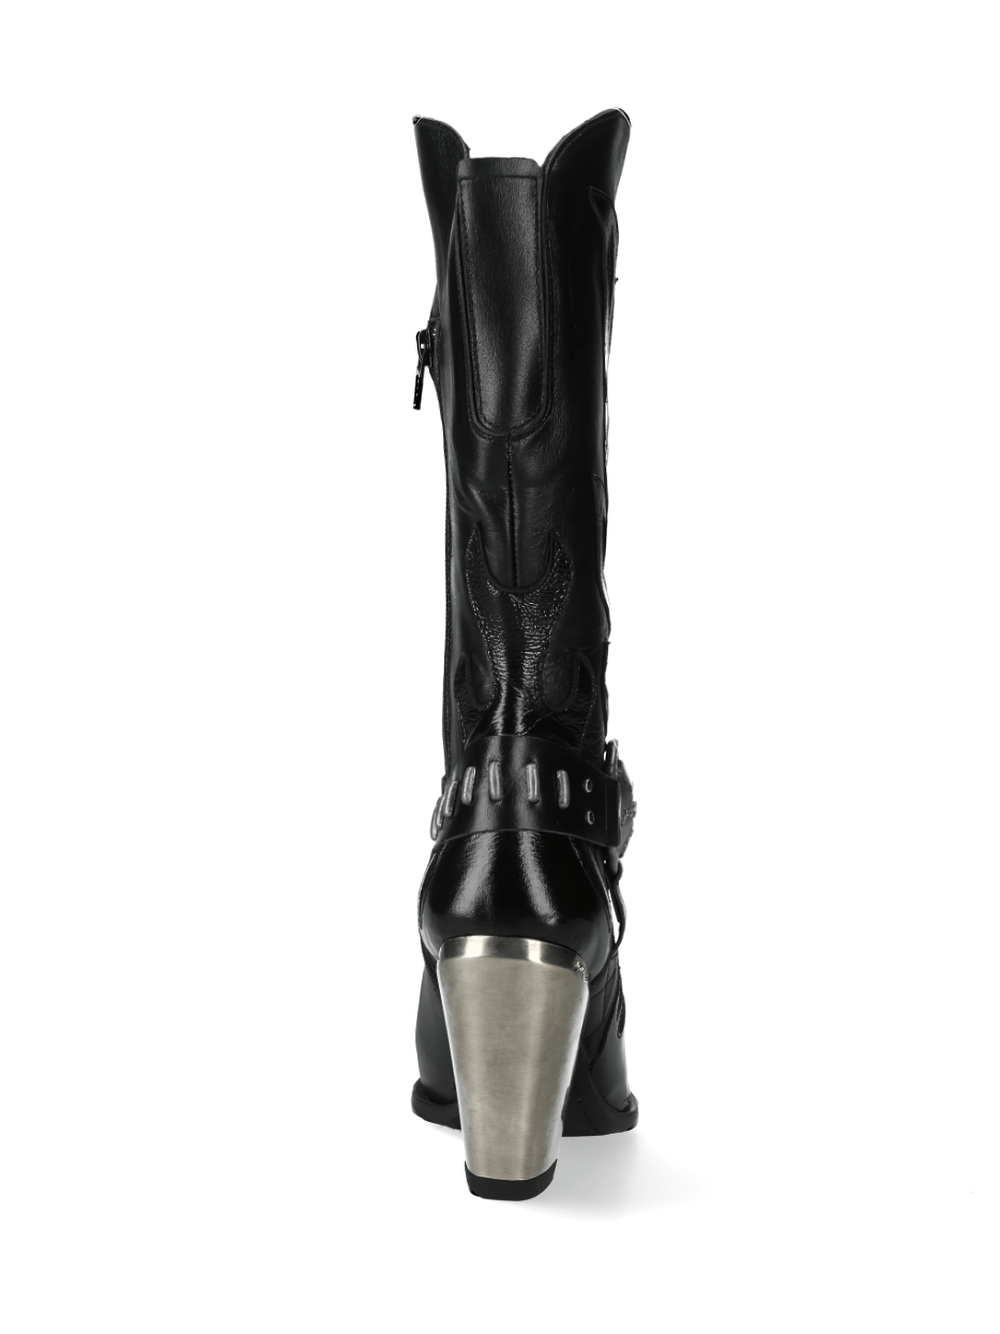 NEW ROCK Elegant Black Western Boots with Metal Accents